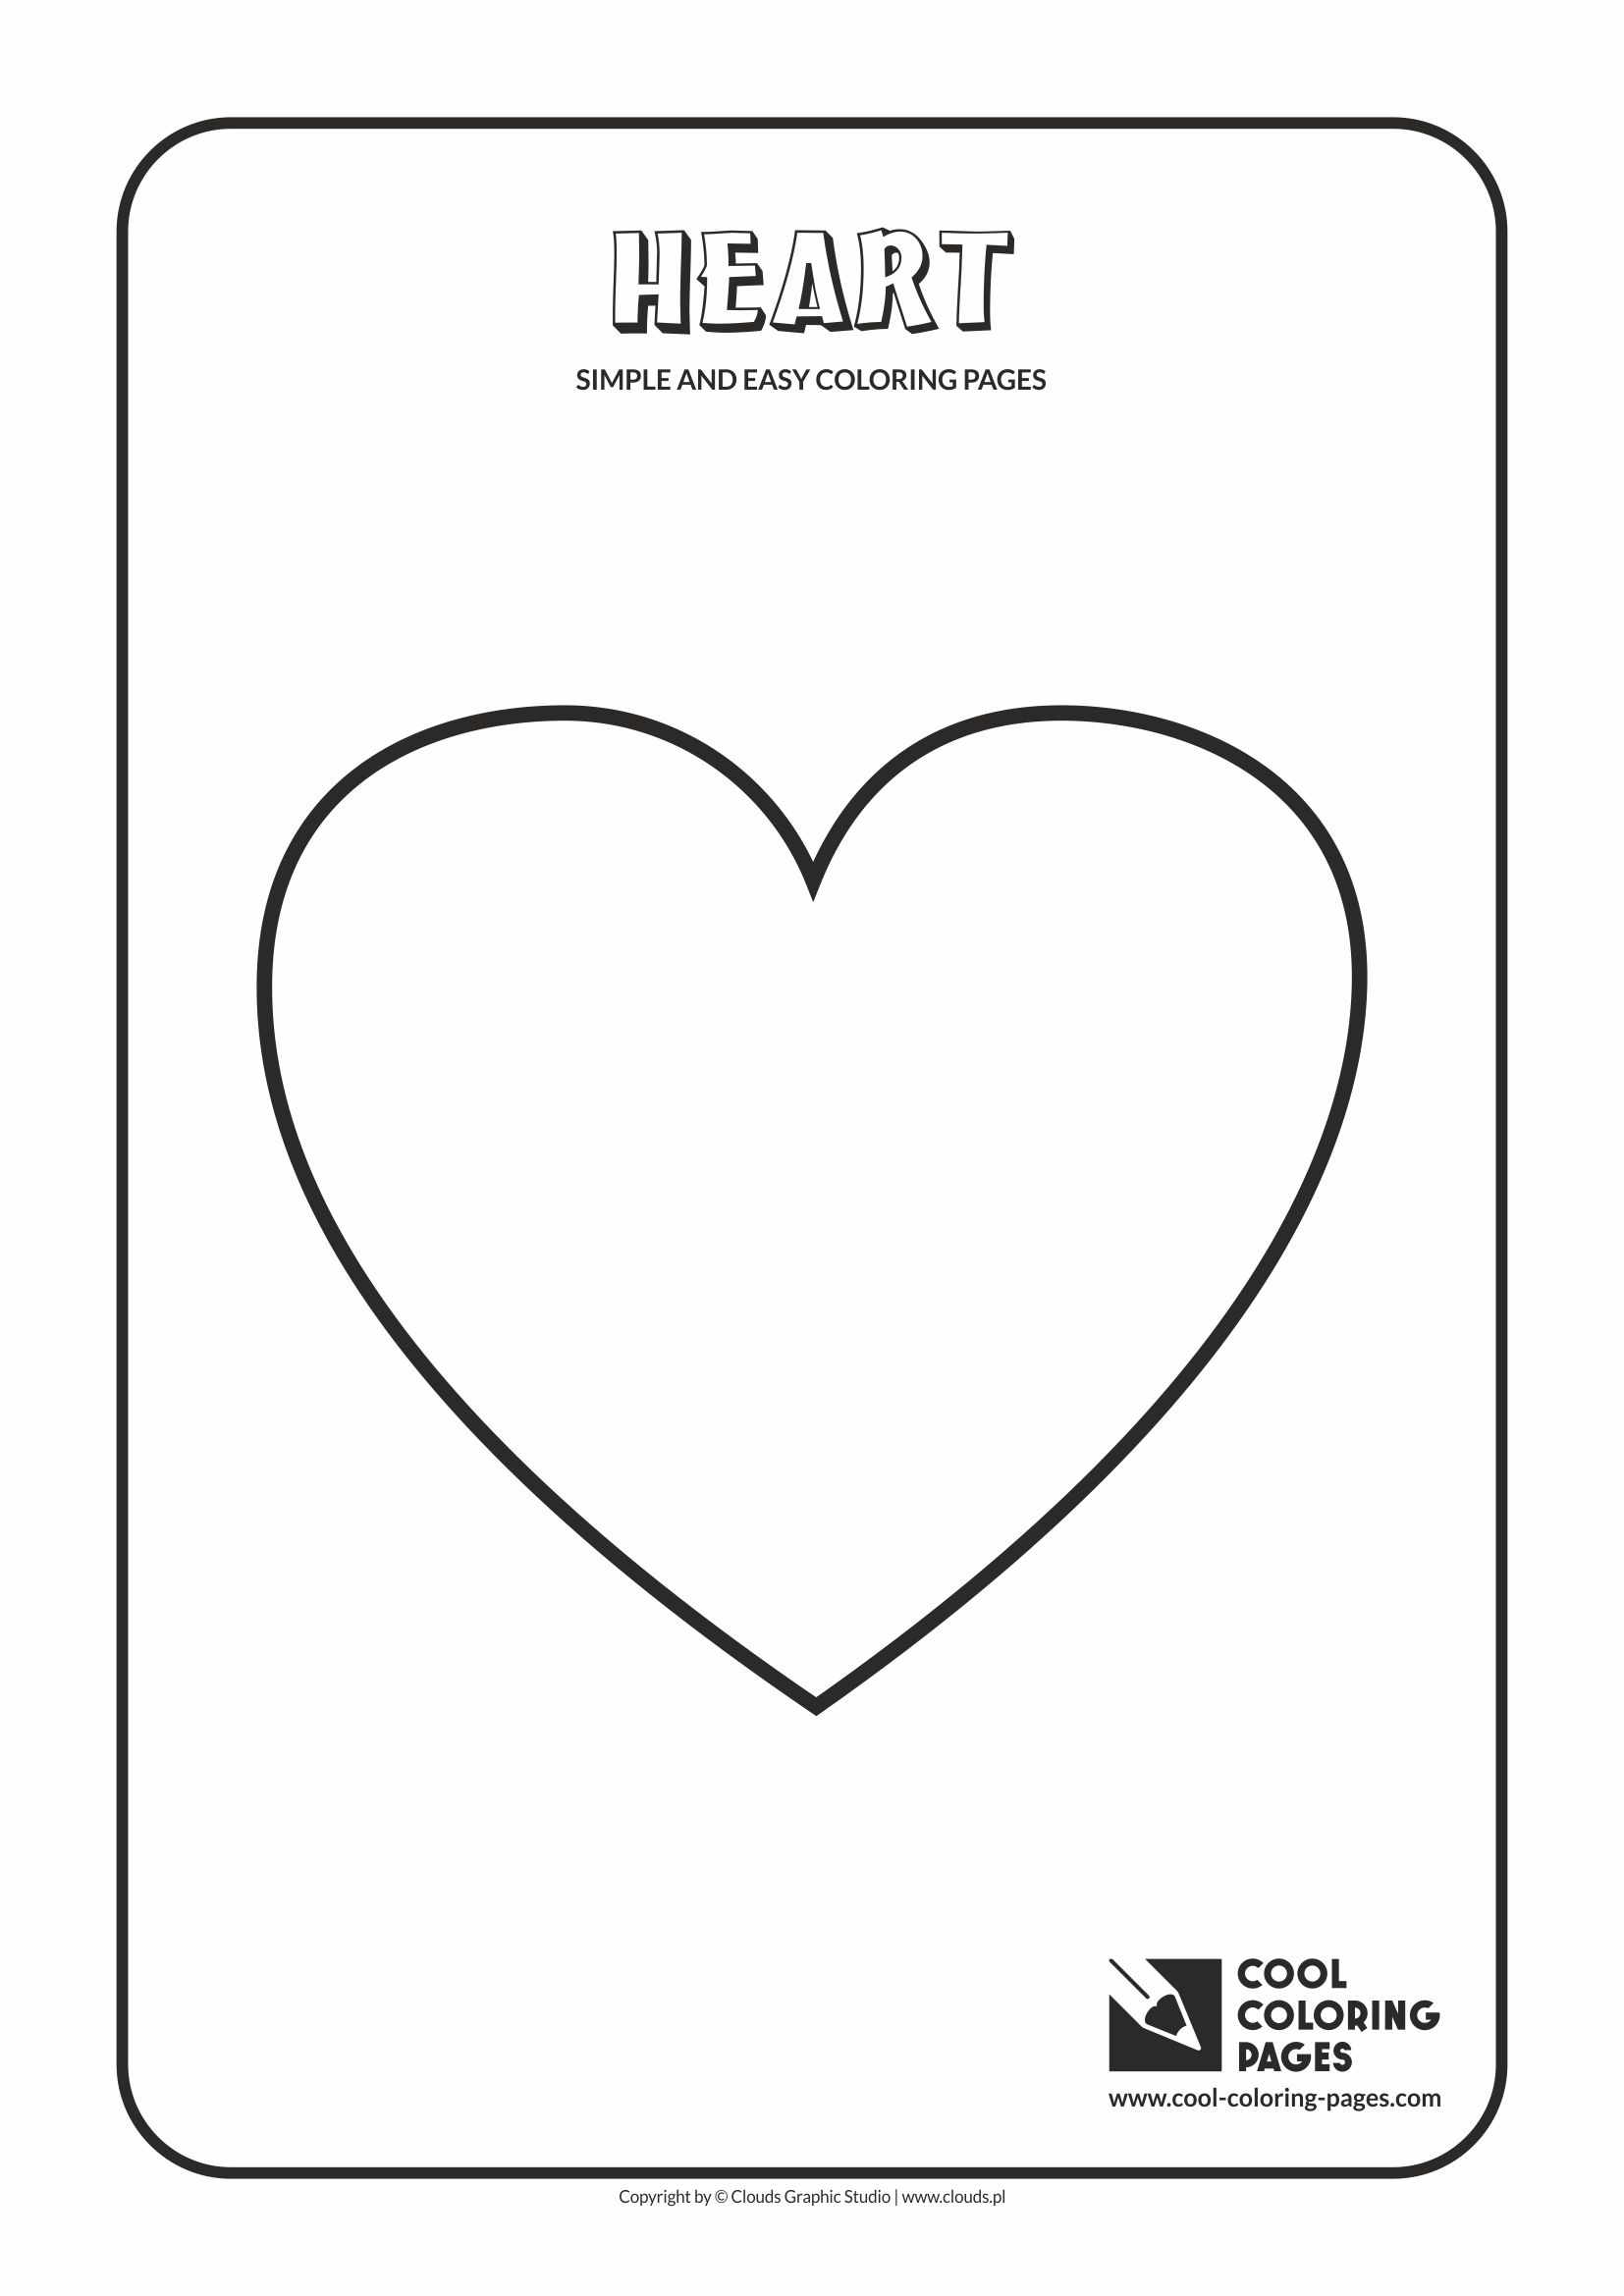 Simple and easy coloring pages for toddlers - Heart